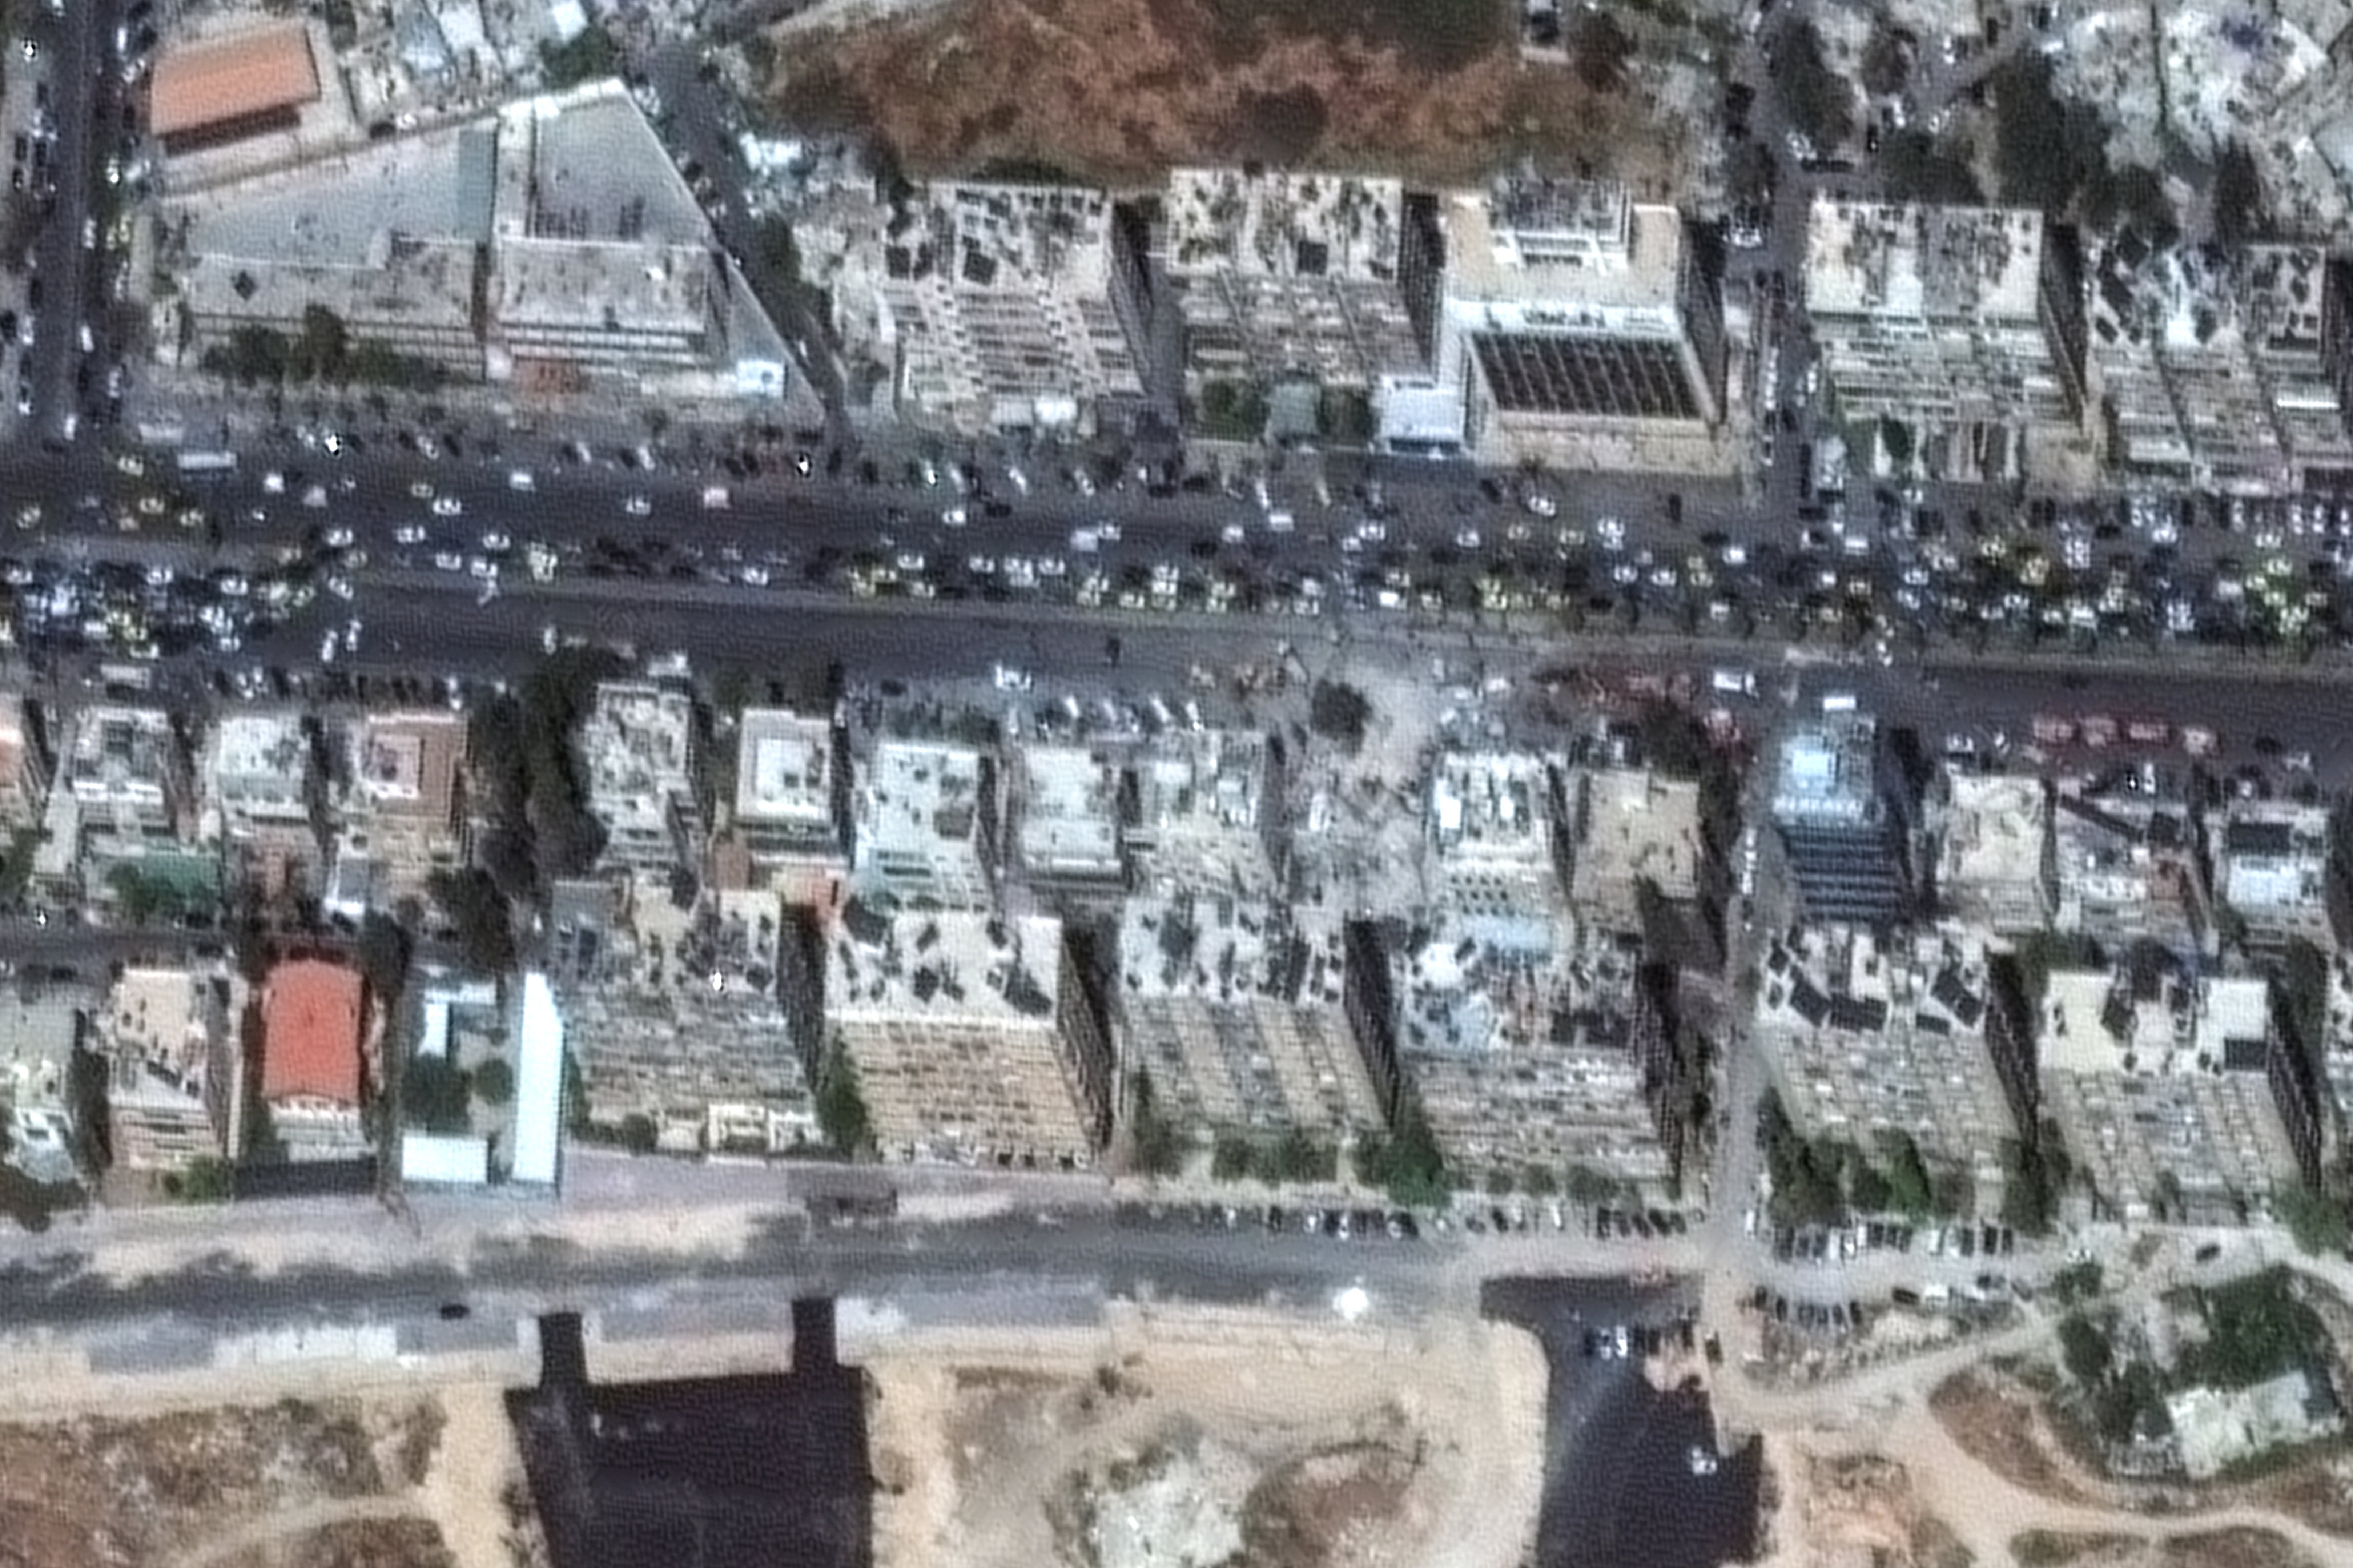 A satellite image shows the Iranian embassy and consulate in Damascus following a suspected Israeli strike earlier this month